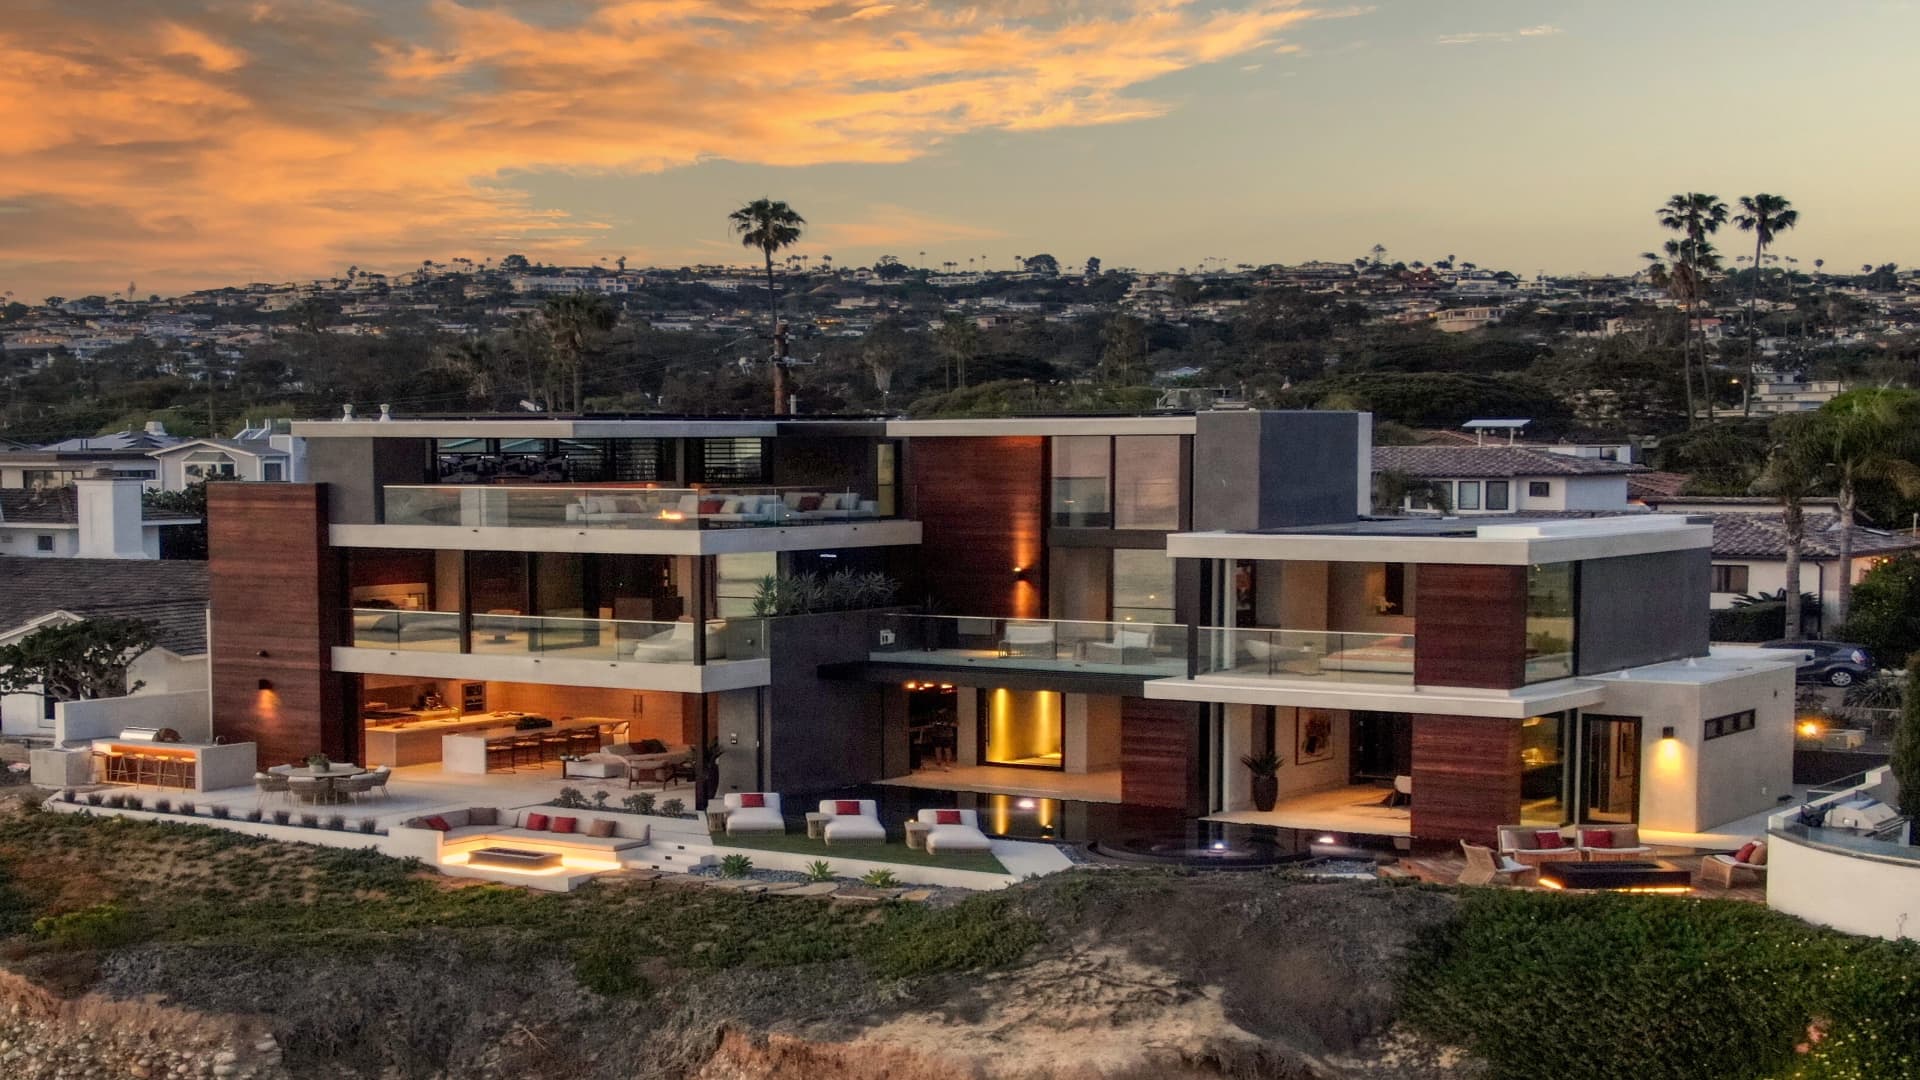 A peek inside this $32.5 million mansion in Southern California